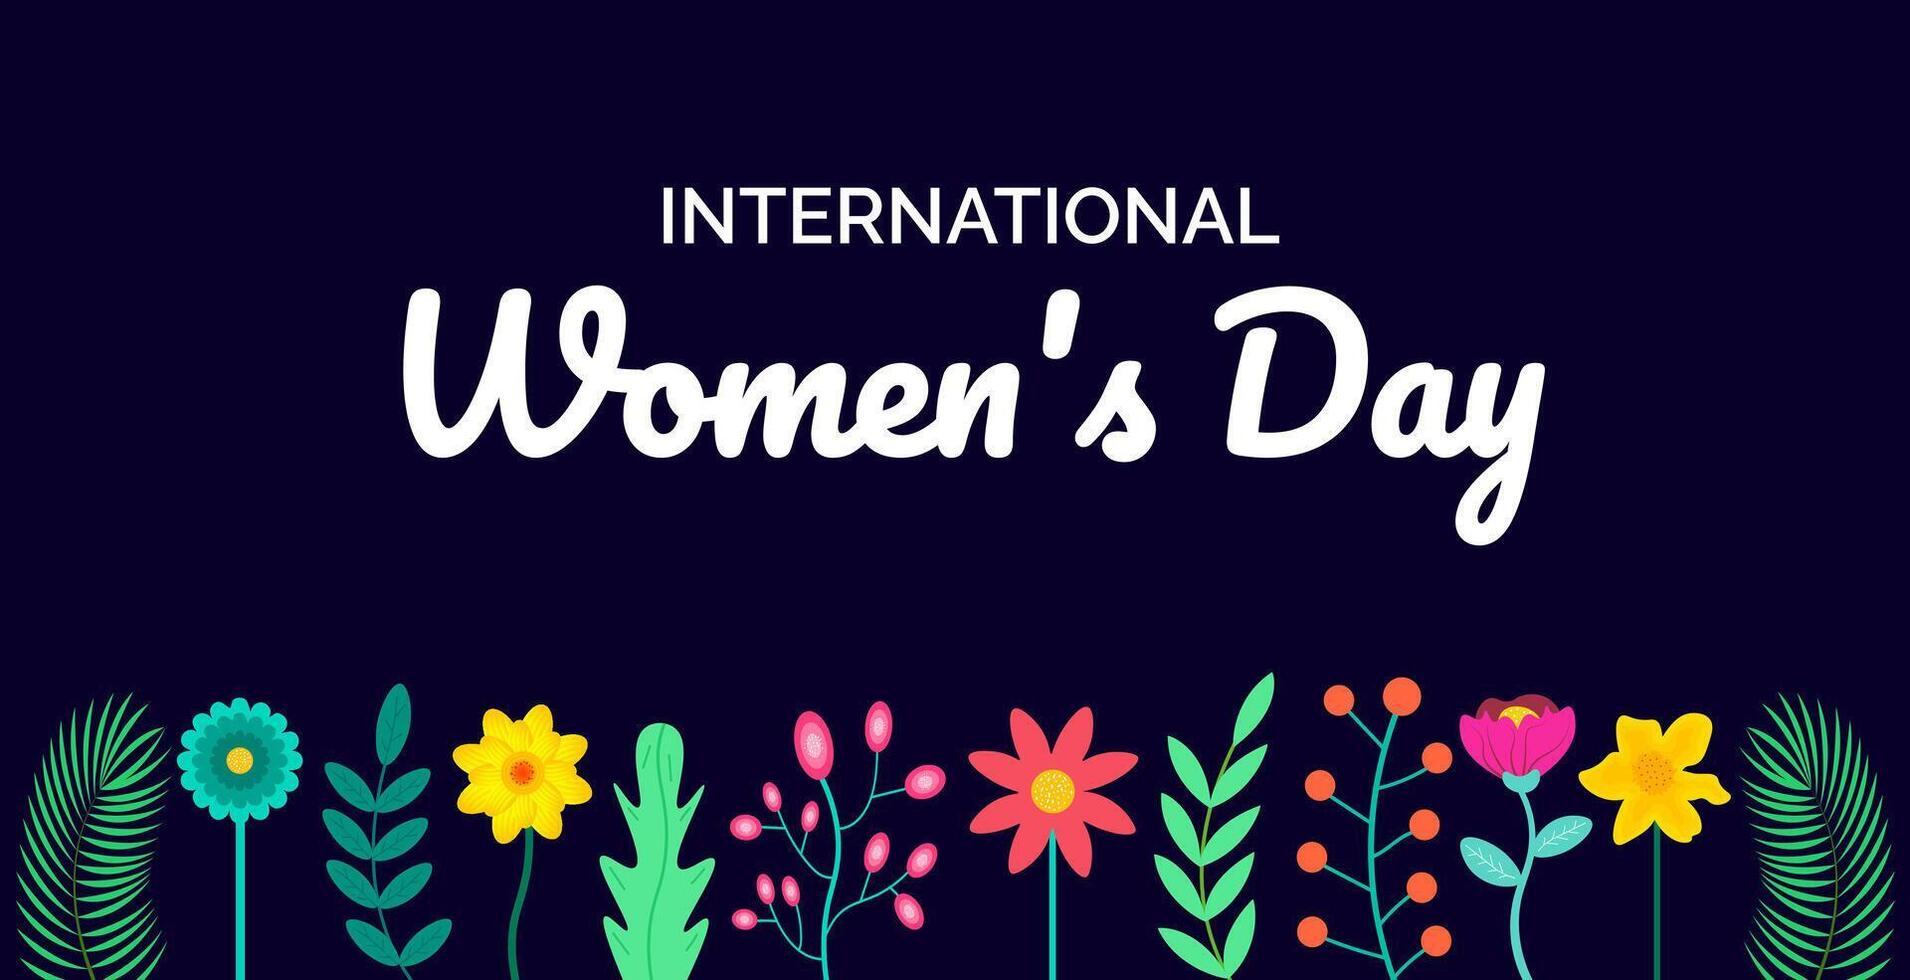 8 March is International Women's Day flower background. use to background, banner, placard, card, and poster design template. vector illustration.